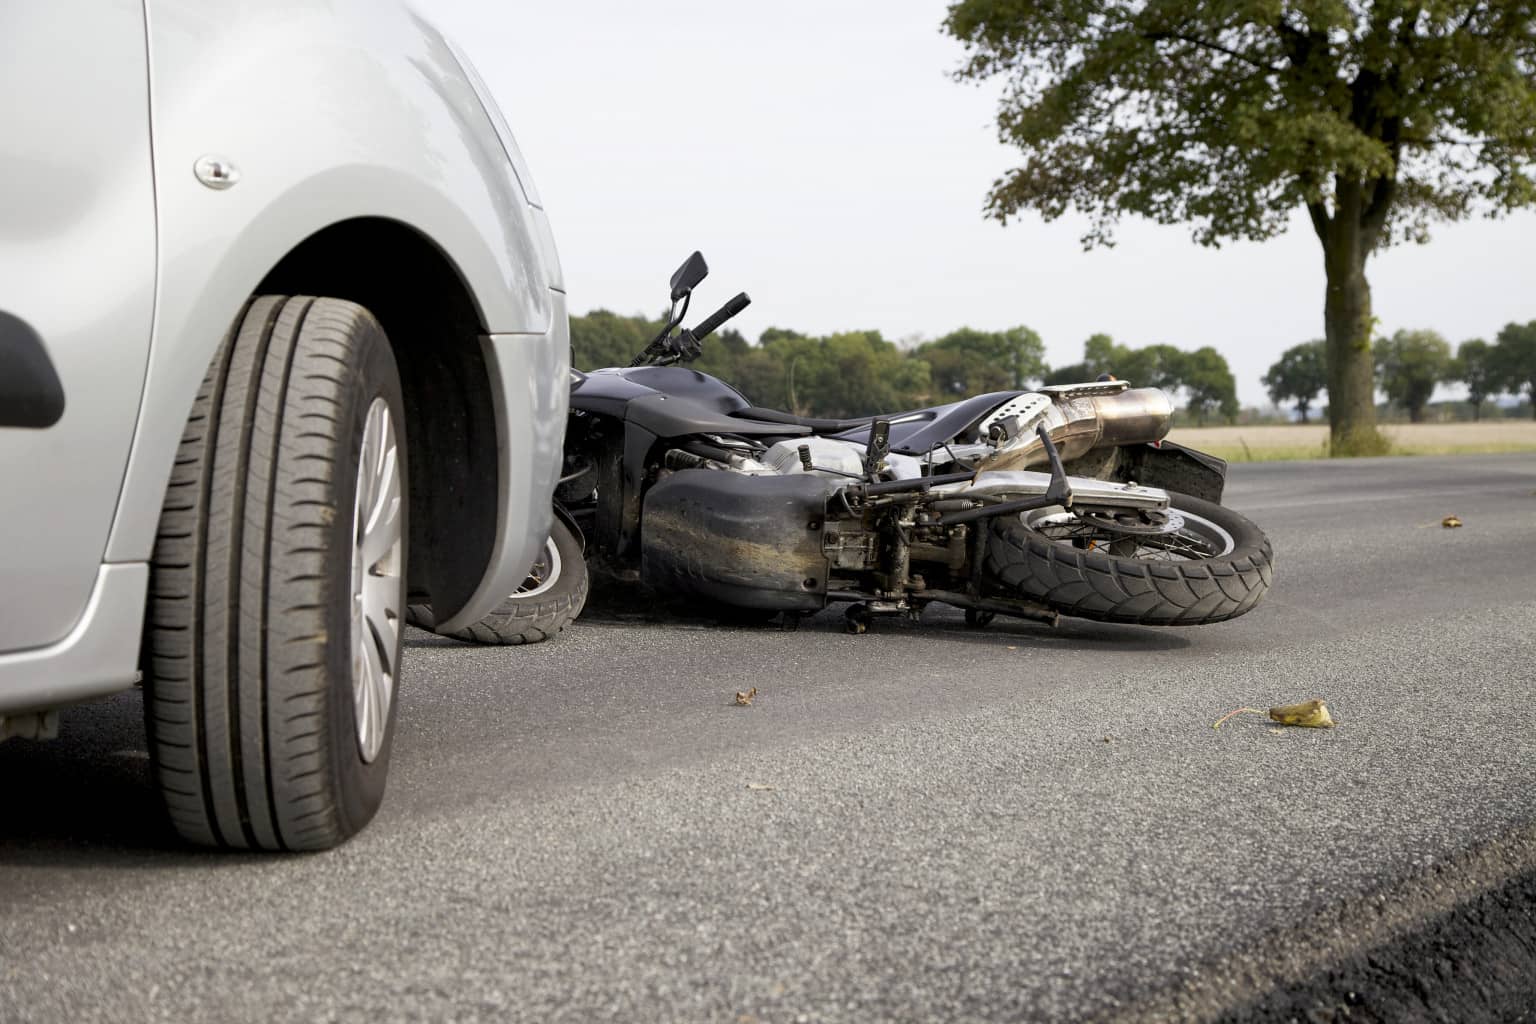 What are the odds of getting in a motorcycle accident